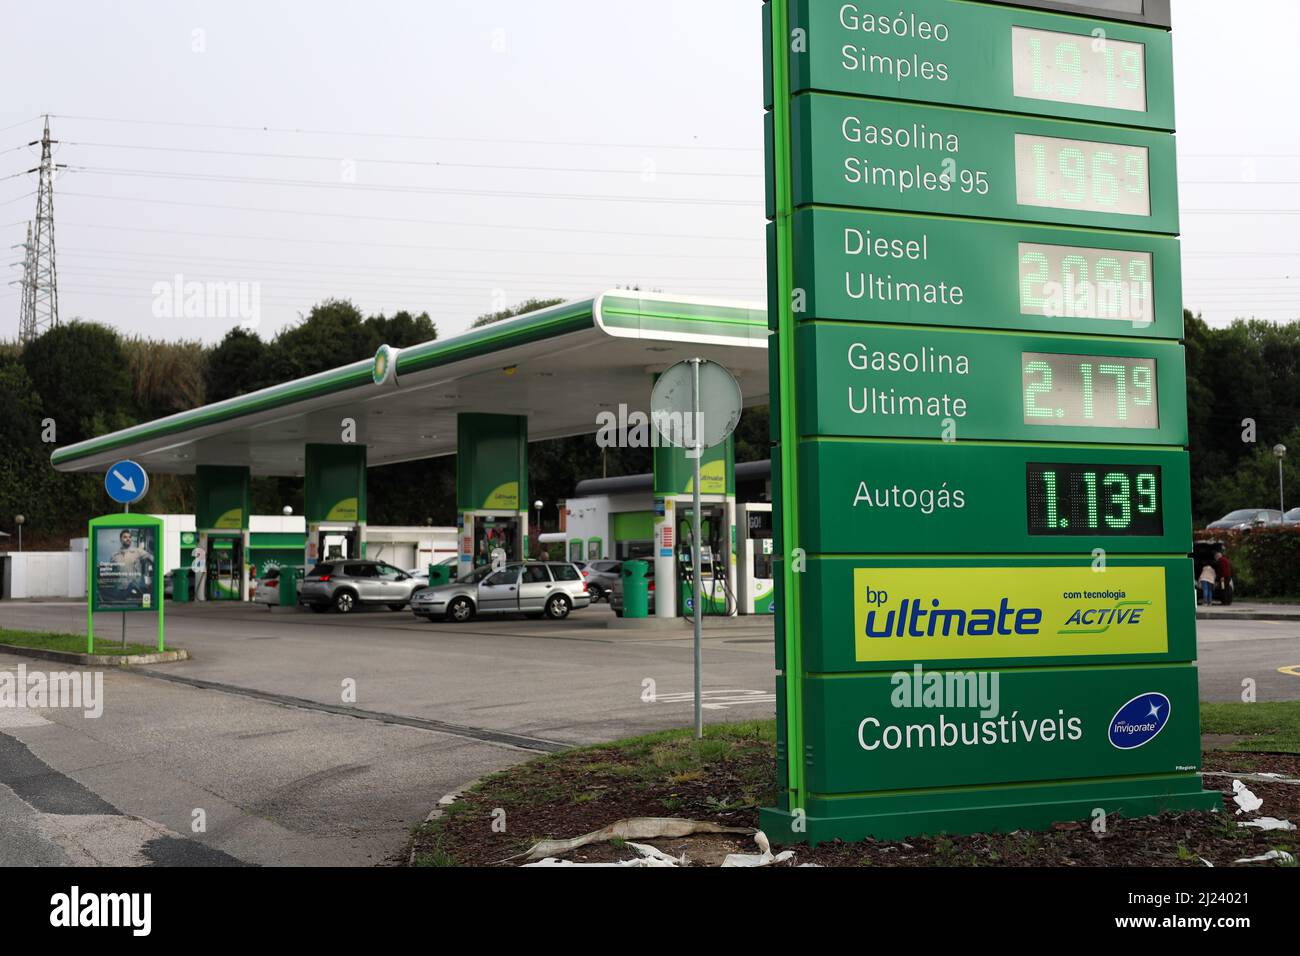 Pumping Station Petroleum Gas Filling Station High Prices Stock Photo